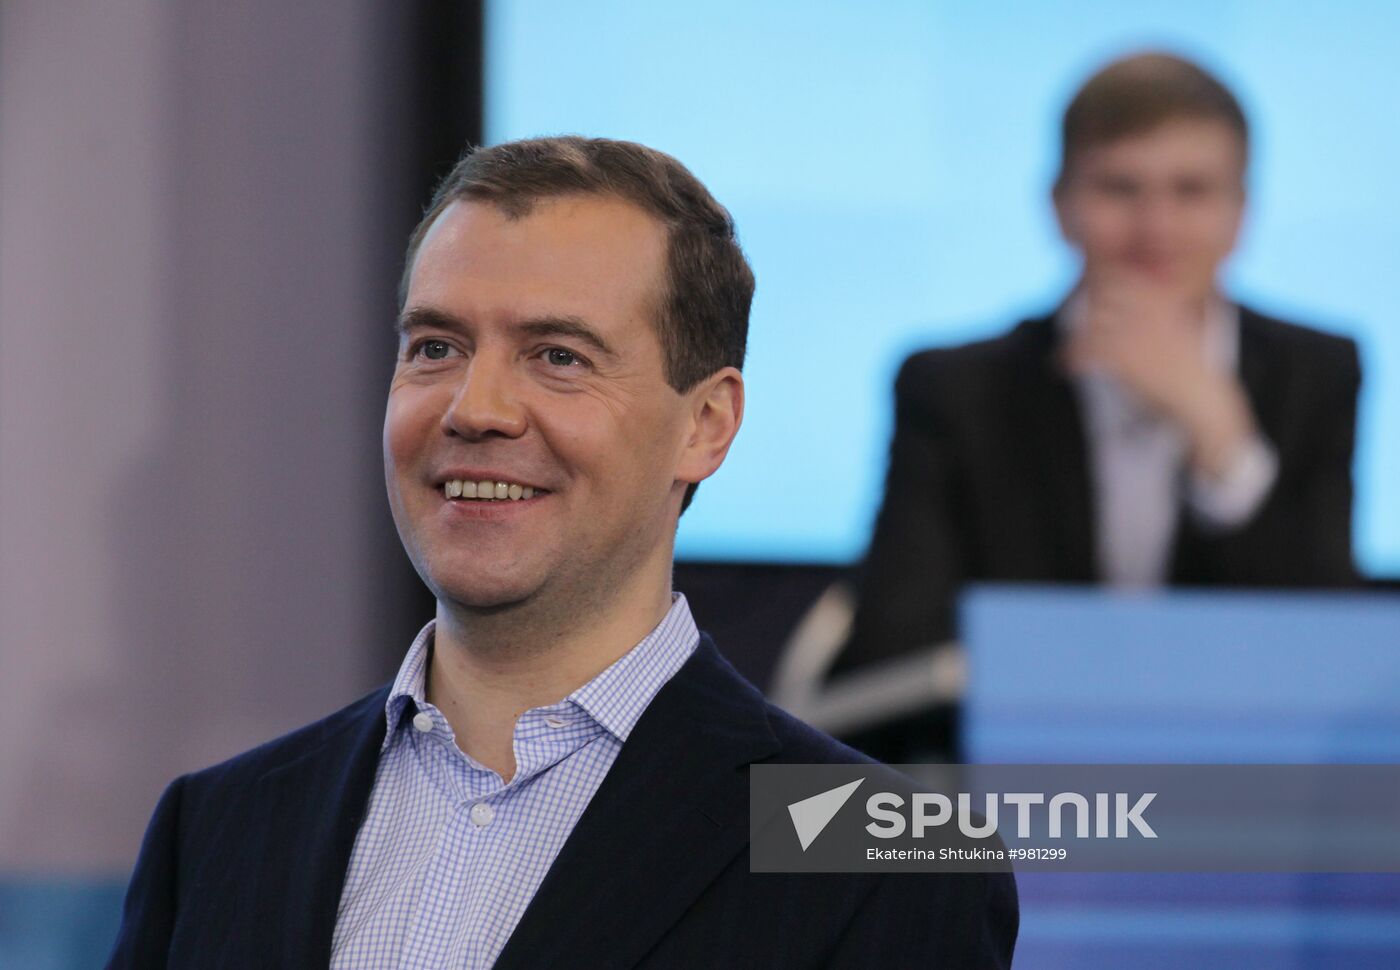 Dmitry Medvedev meets with young scientists and entrepreneurs